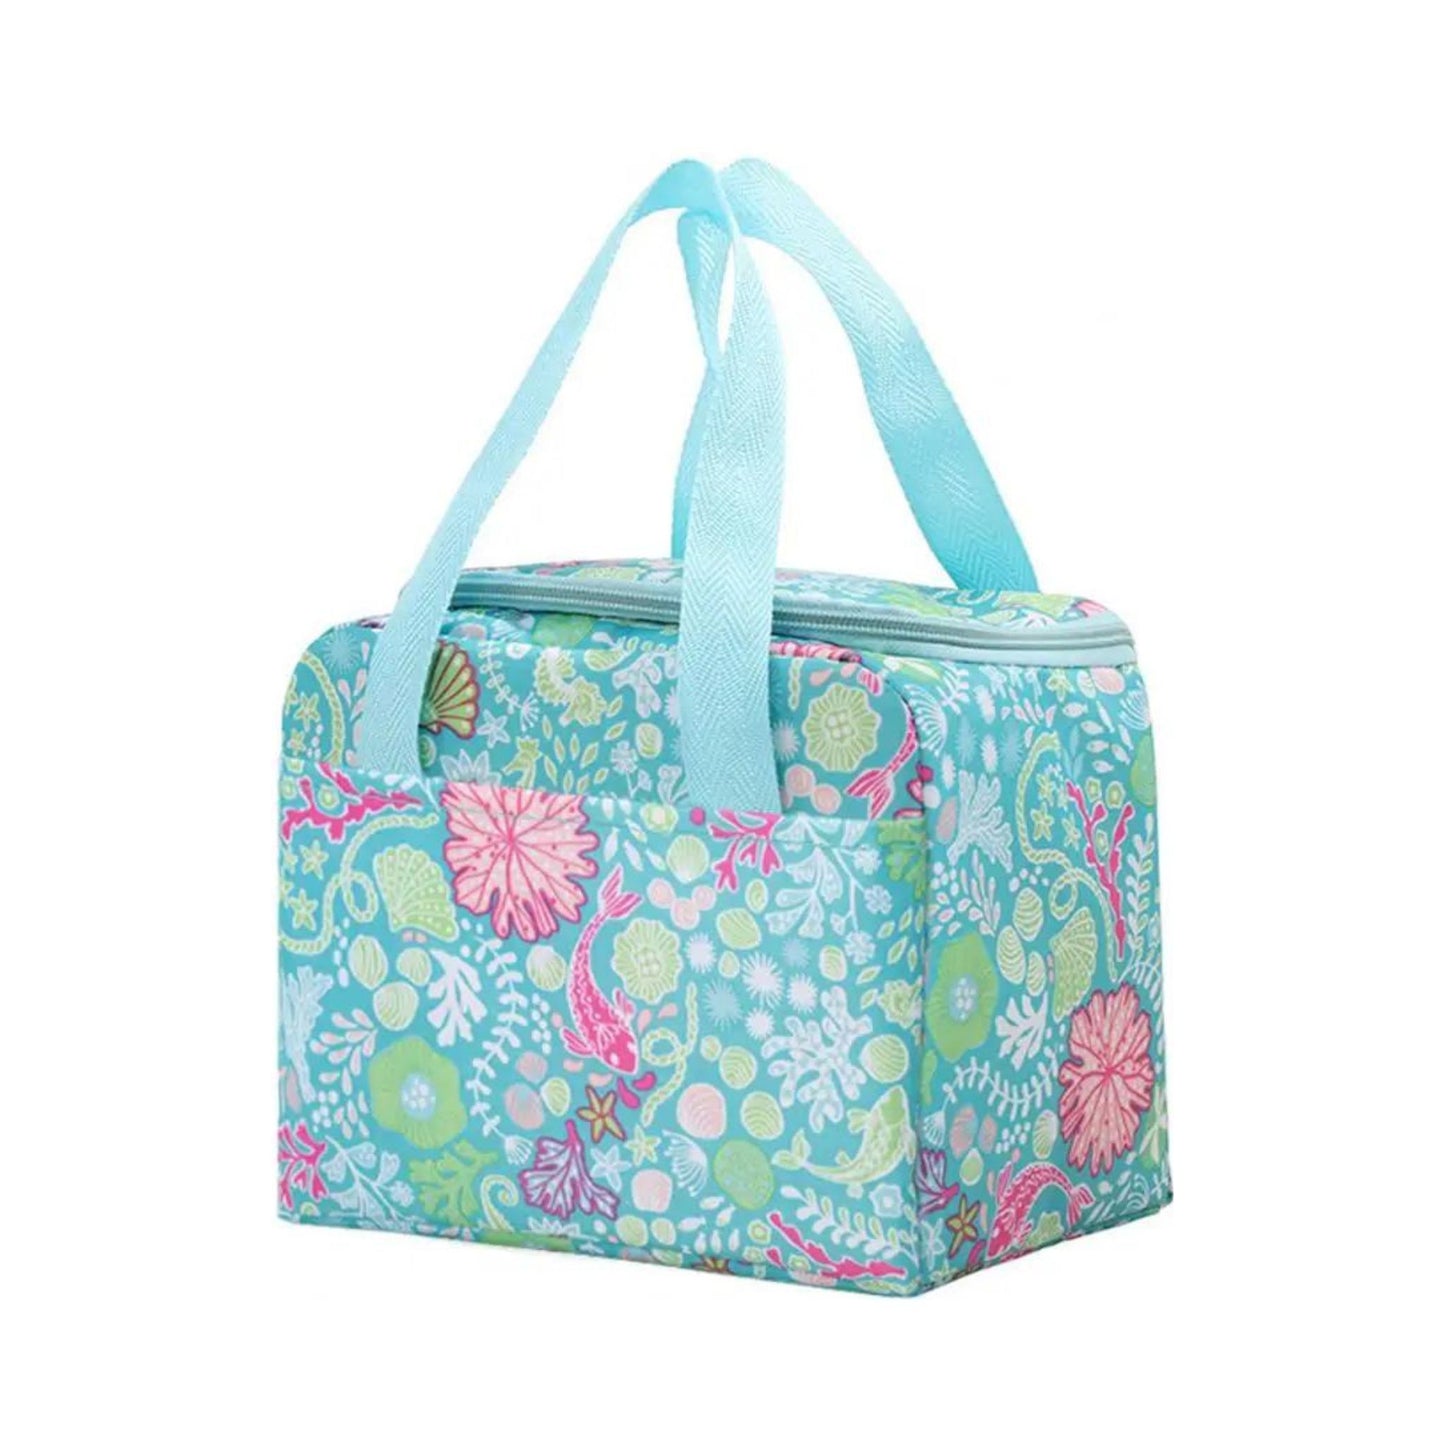 TH19 Multi-Print Insulated Lunch Bag